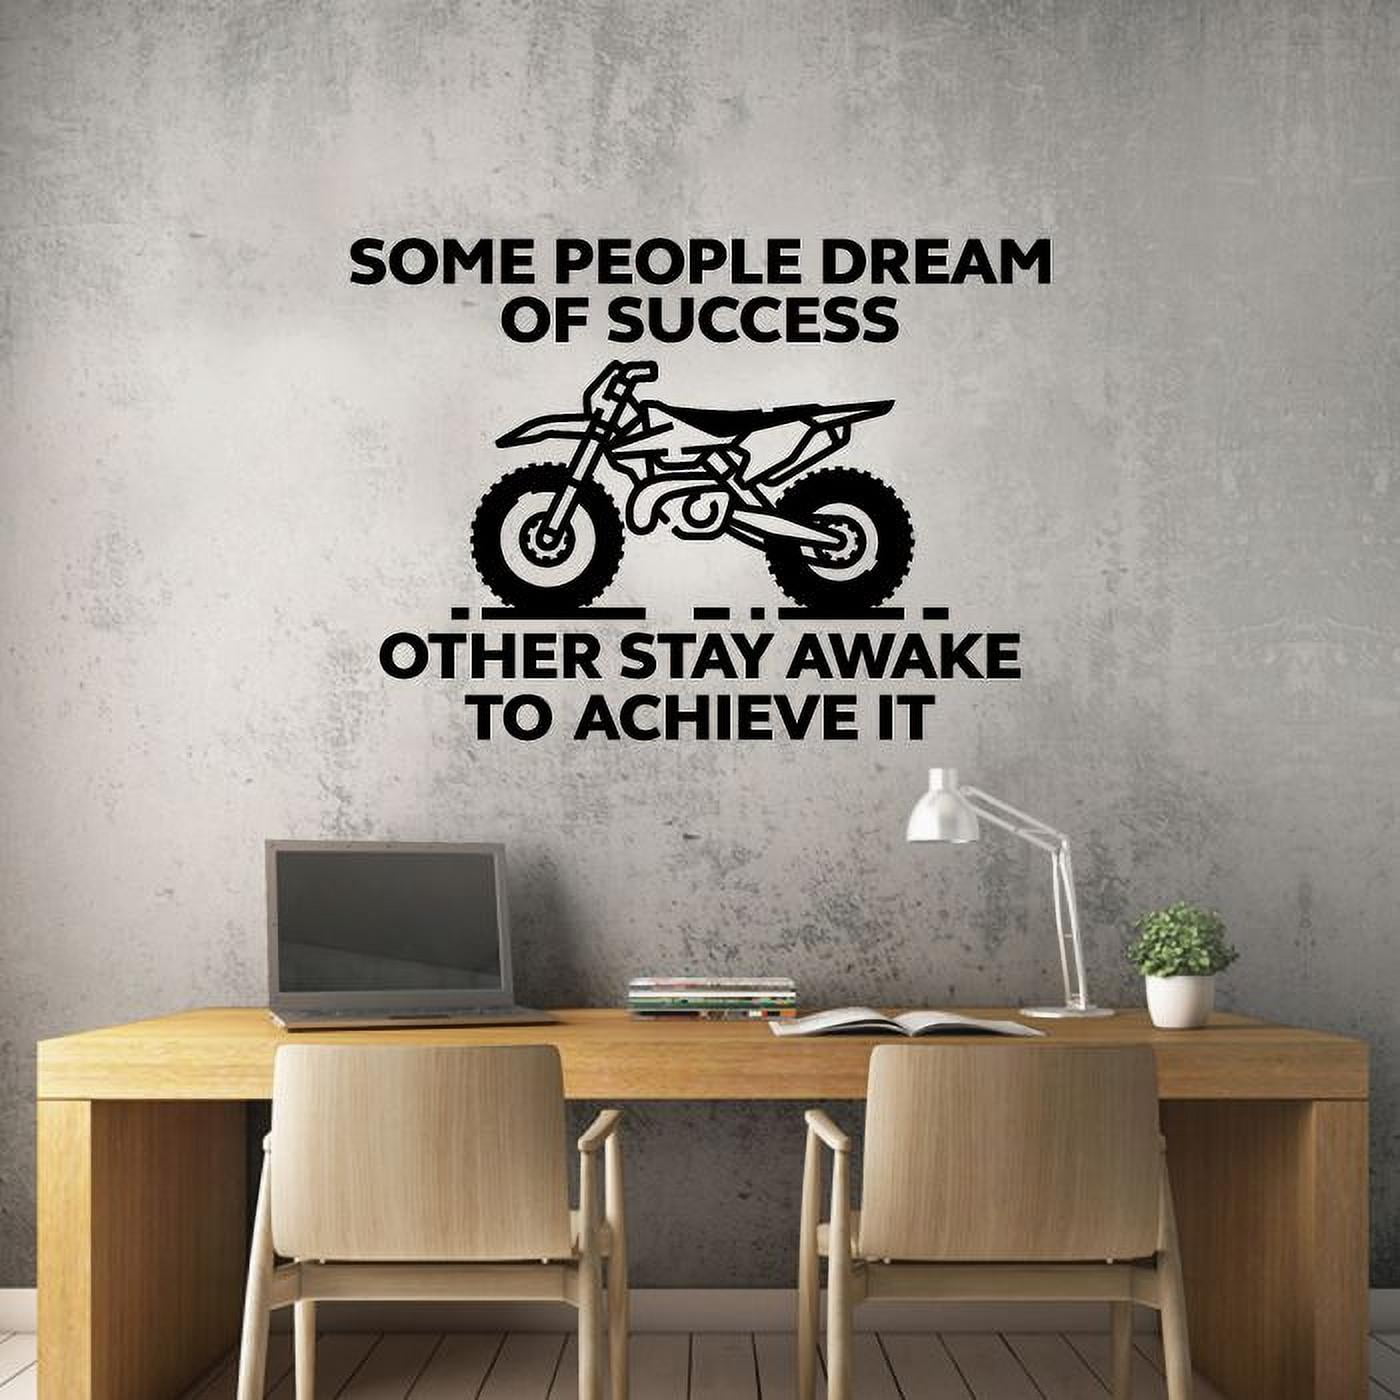 Dirk Bike Some People Dream Of Success Others Stay Awake To Achieve It  Quotes Vinyl Wall Sticker Art Decal Sports Boys Kids Room Design Bedroom  Bike Extreme Sports Wall Sticker Vinyl Size (